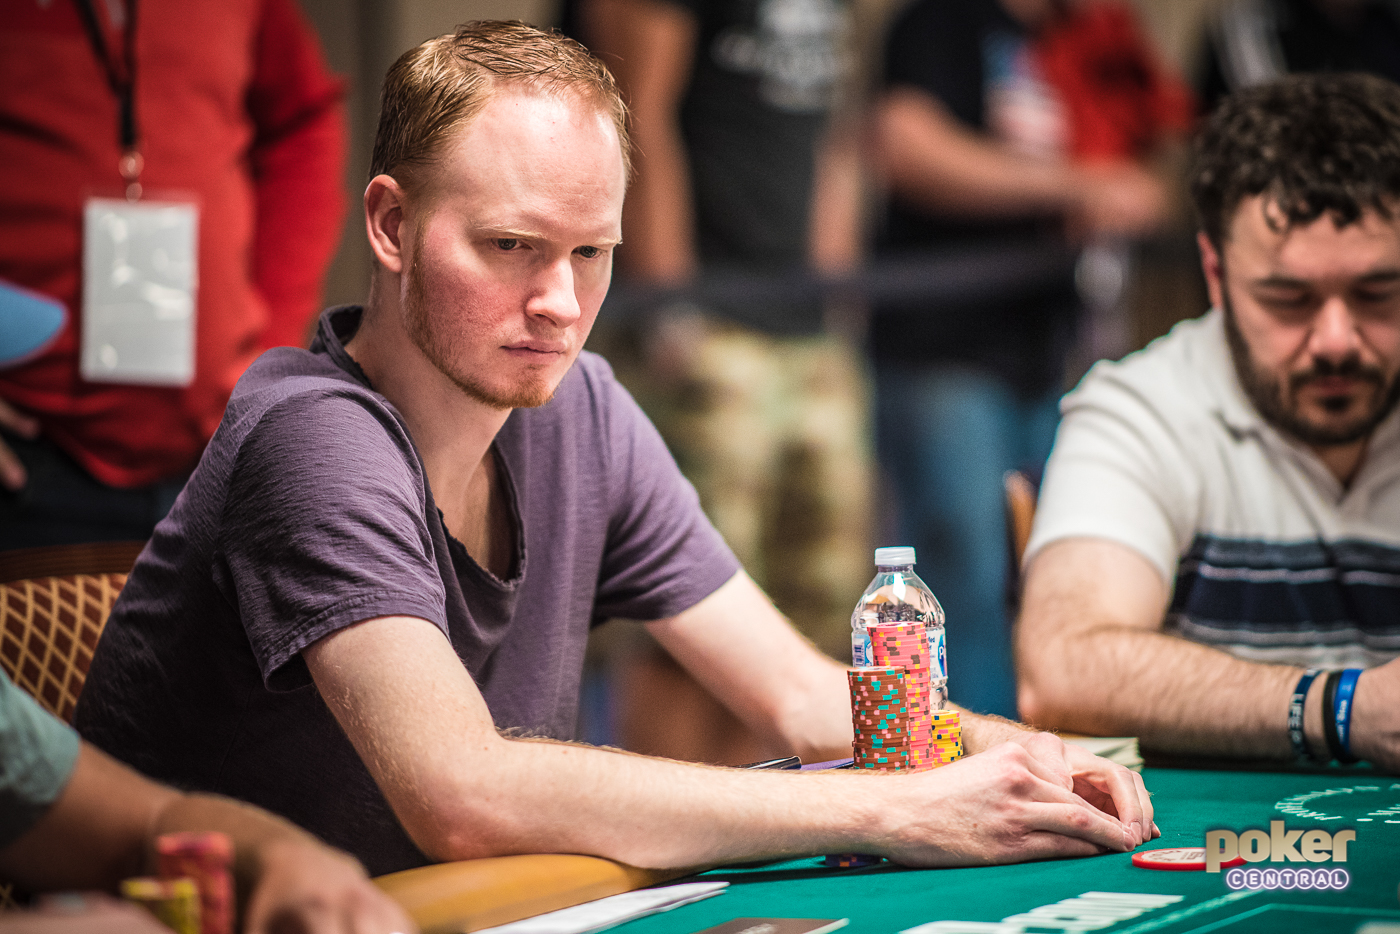 Jon Turner mixing it up with Anthony Zinno at the 2018 WSOP.